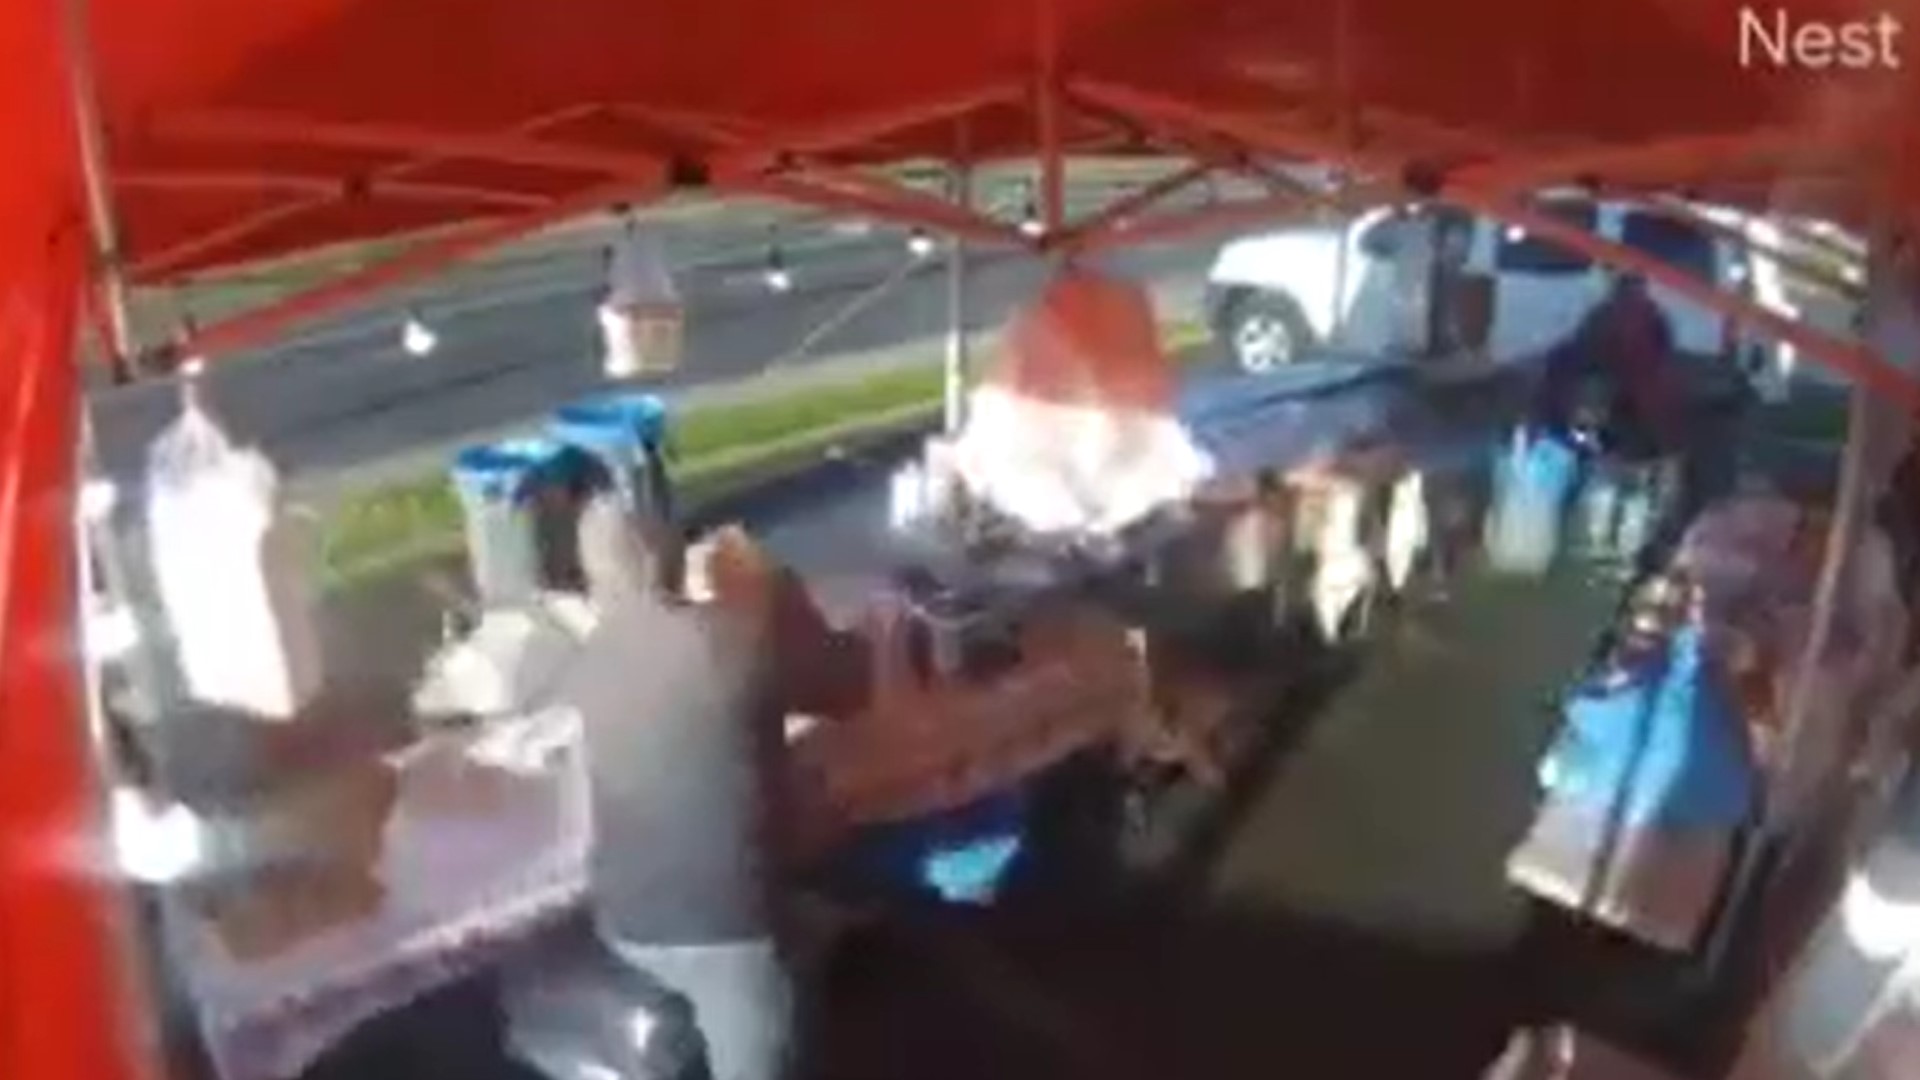 The angry customer, caught on camera Sunday evening taking swings at employees and dumping over containers of food, won't be welcome back for repeat business.